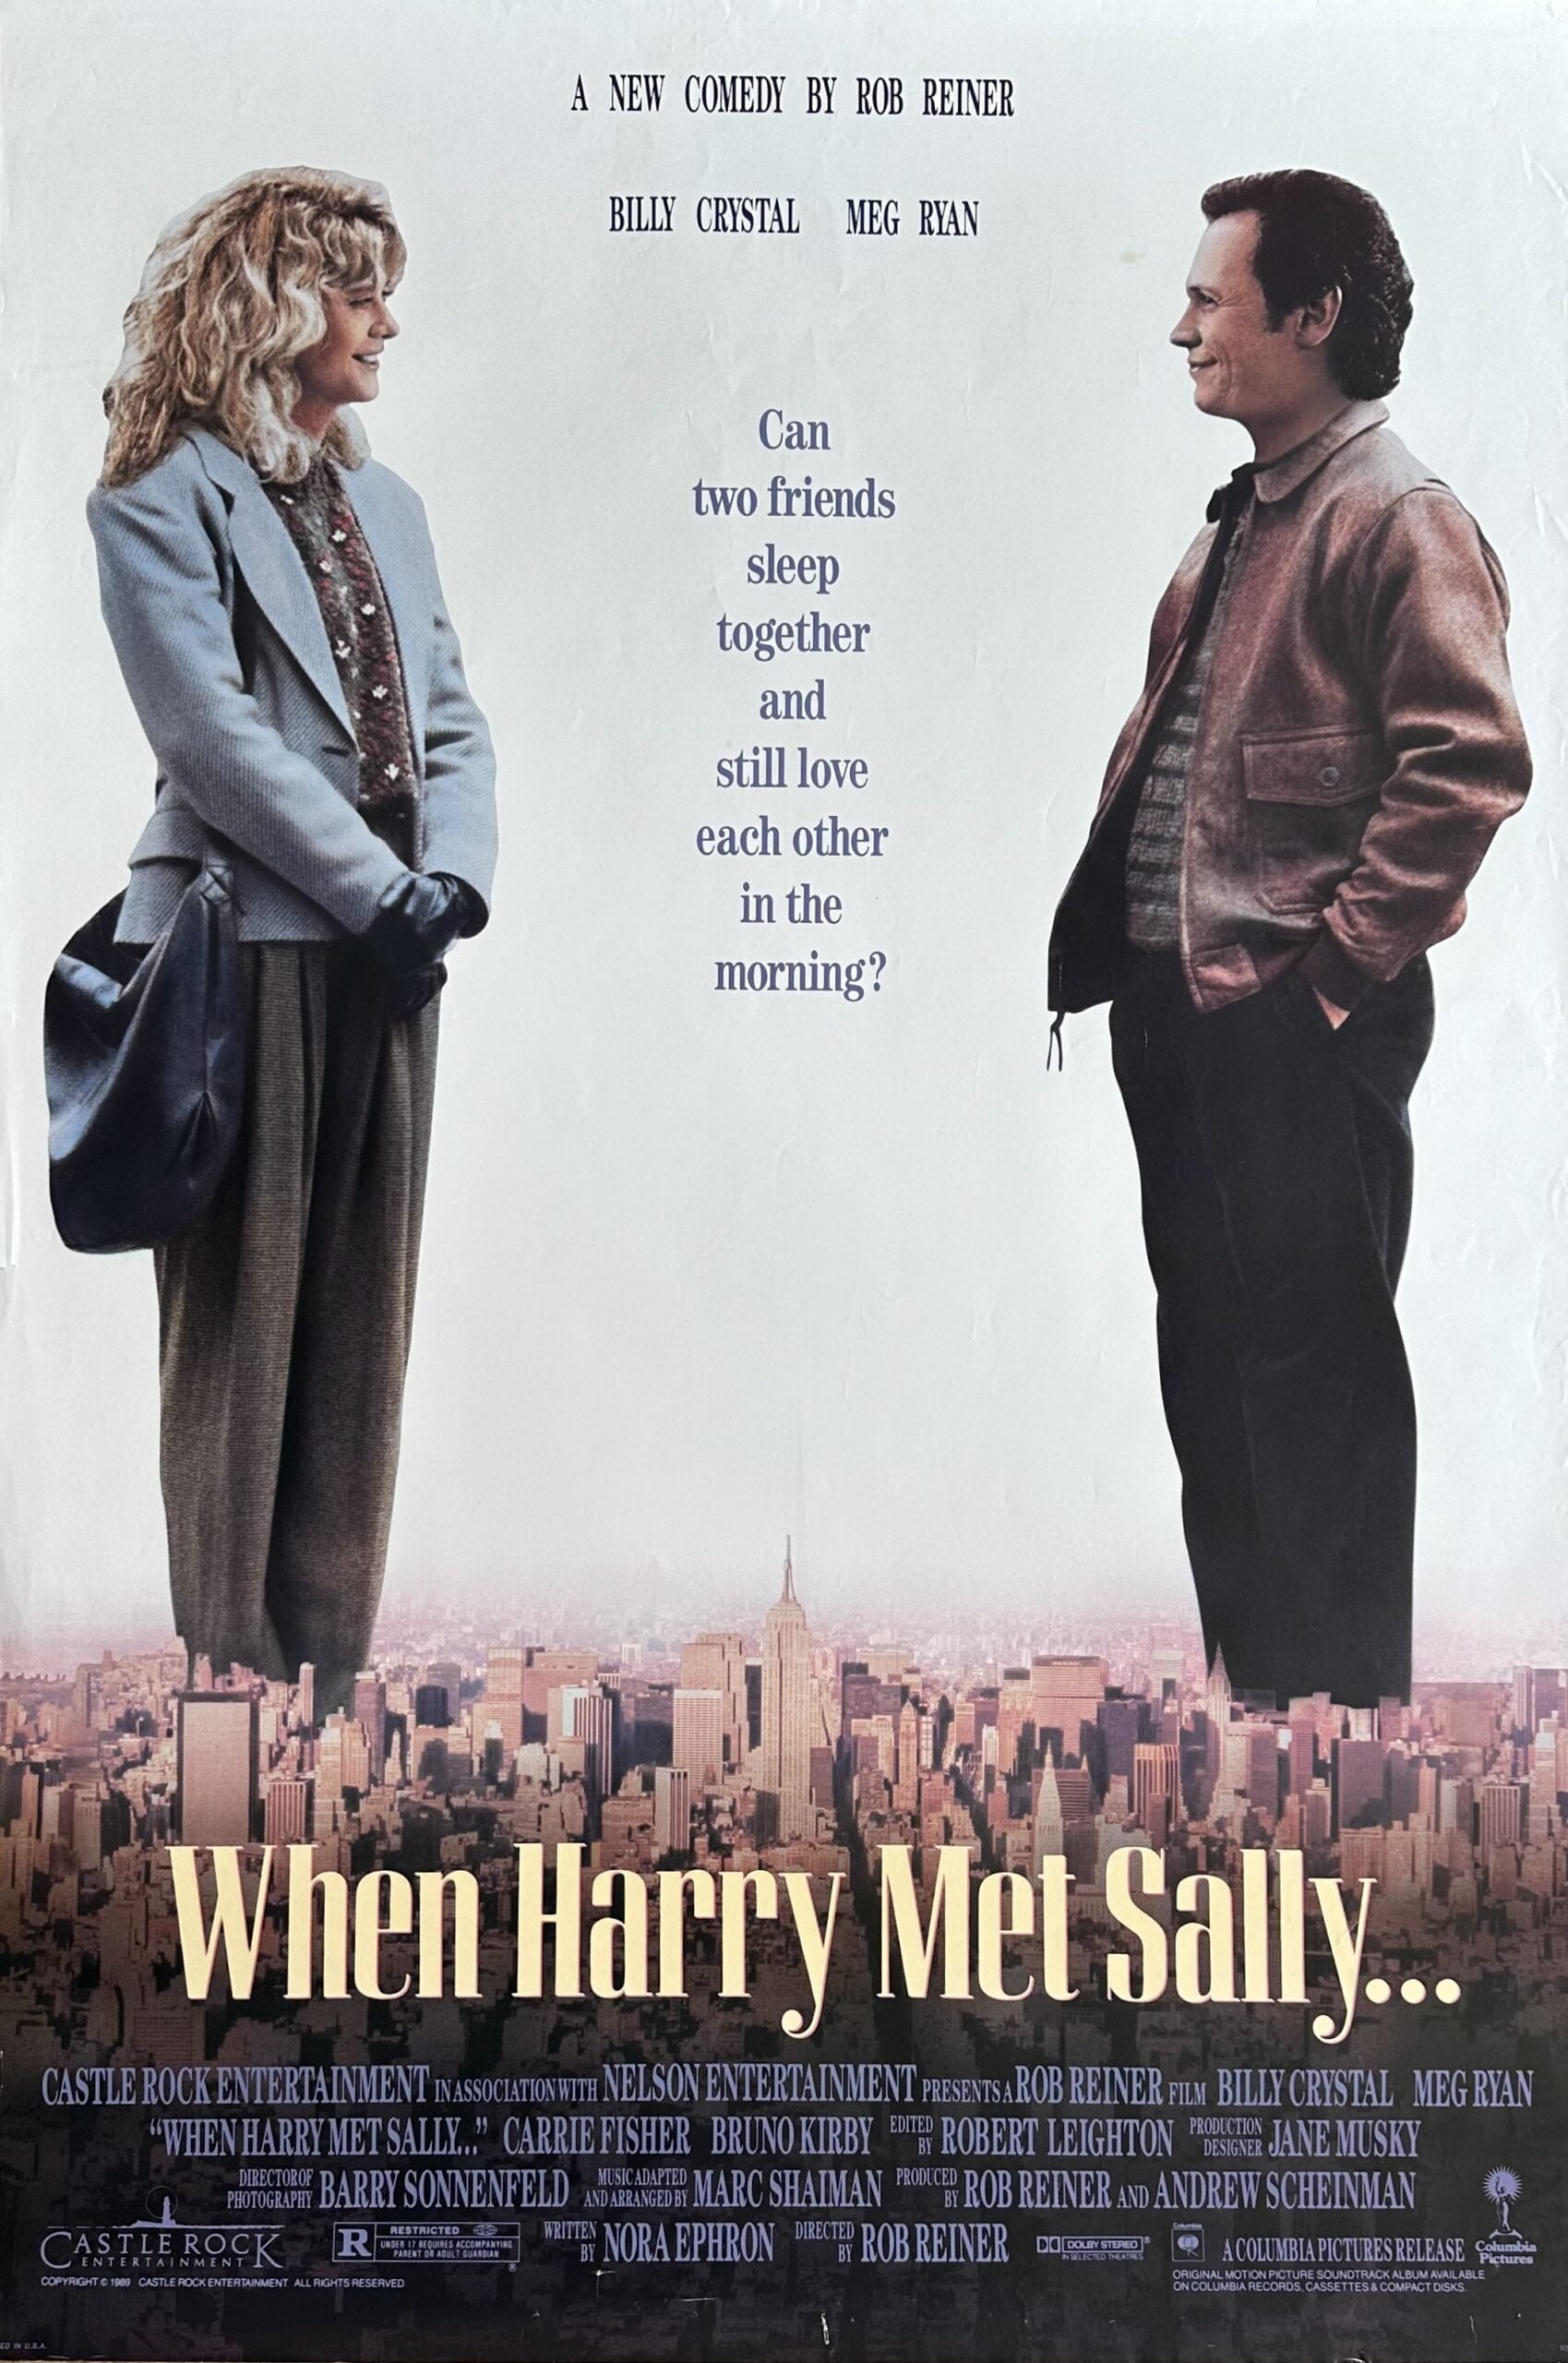 Original vintage cinema movie poster for the comedy, When Harry Met Sally